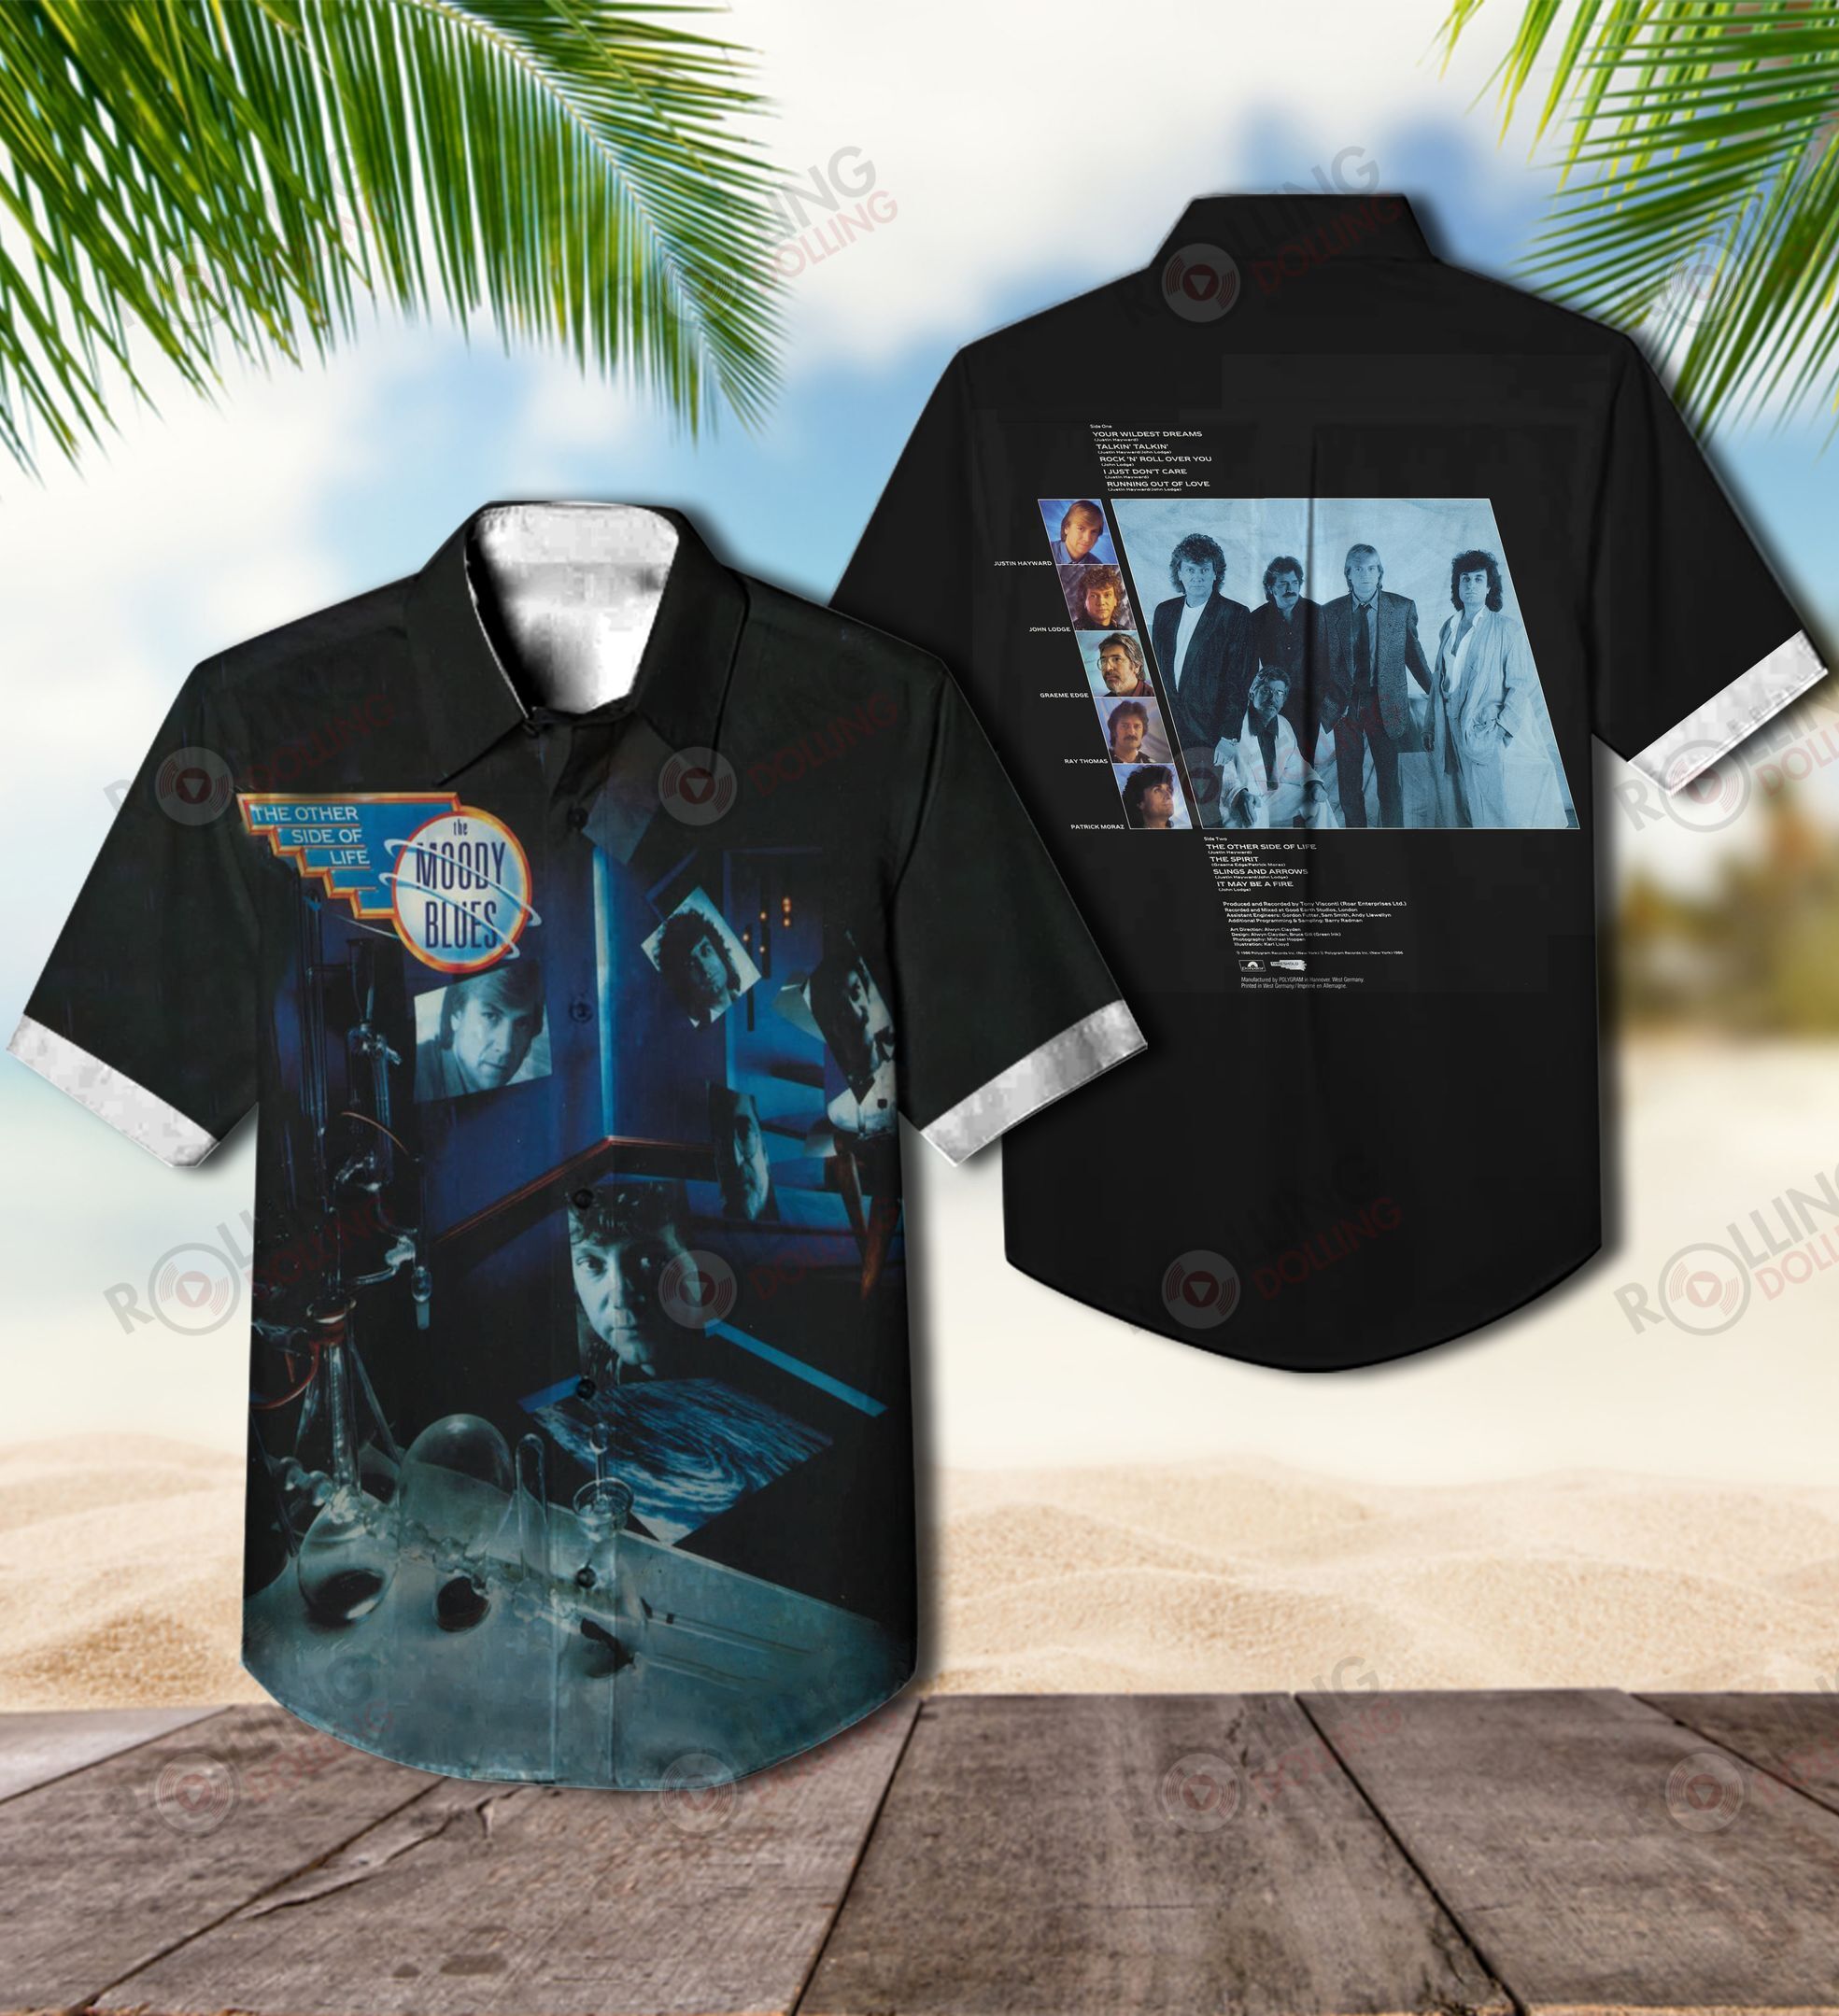 Check out these top 100+ Hawaiian shirt so cool for rock fans 123